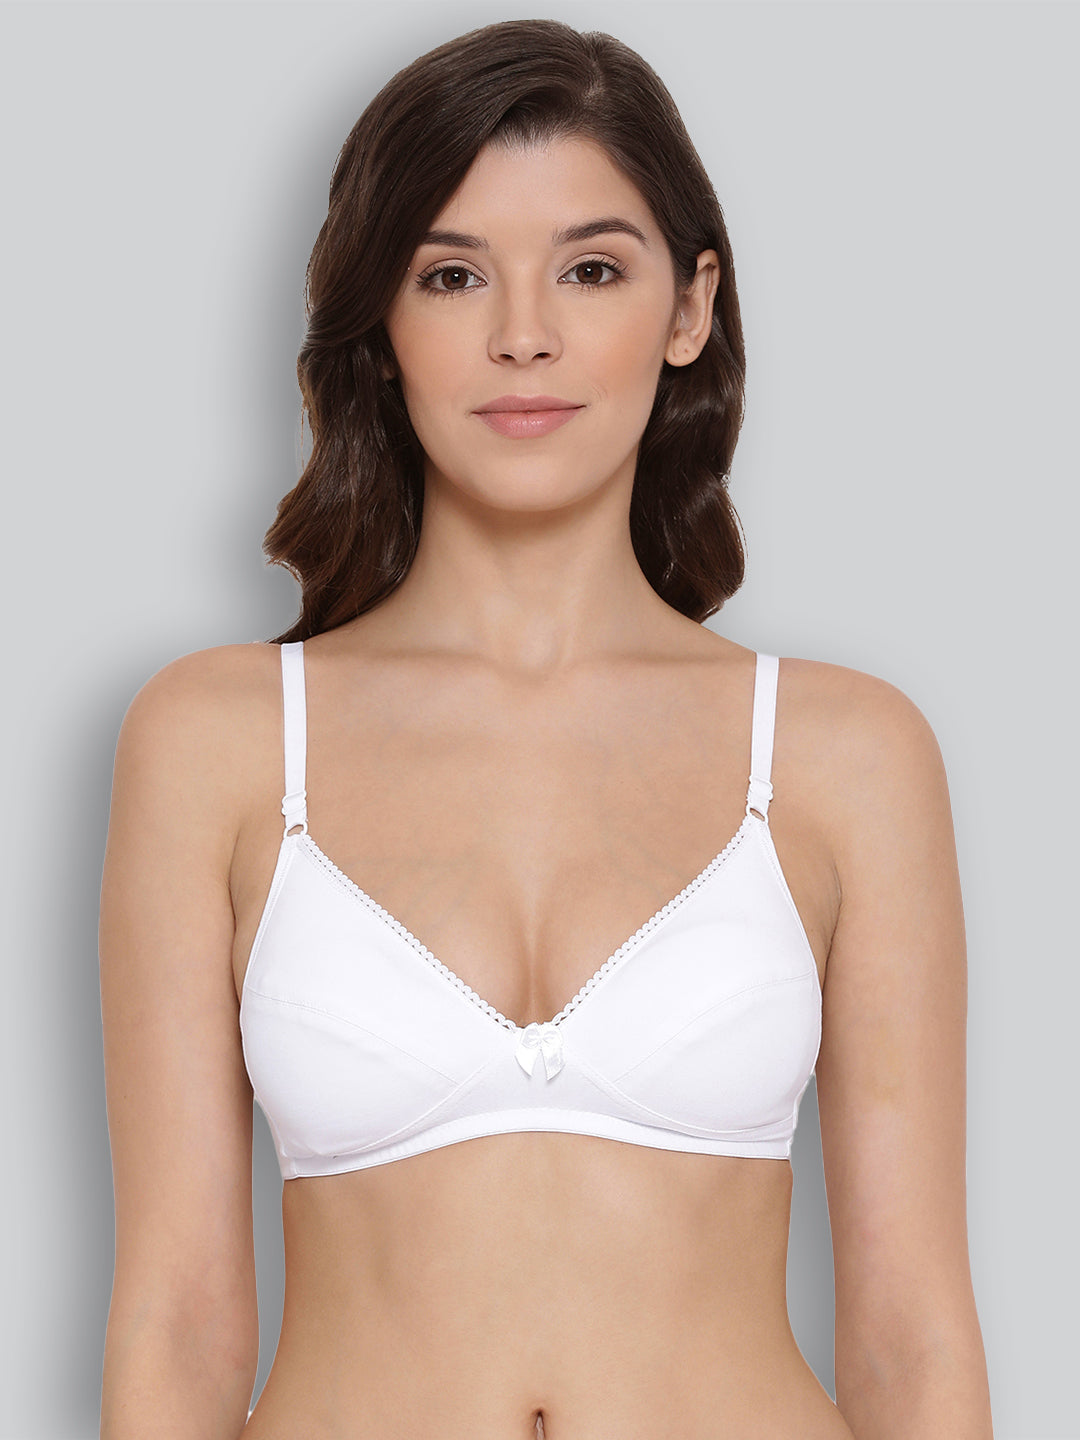 Buy FEELBLUE Comfort Women's Transparent Strap Non-Padded Non-Wired Cotton  Bra at